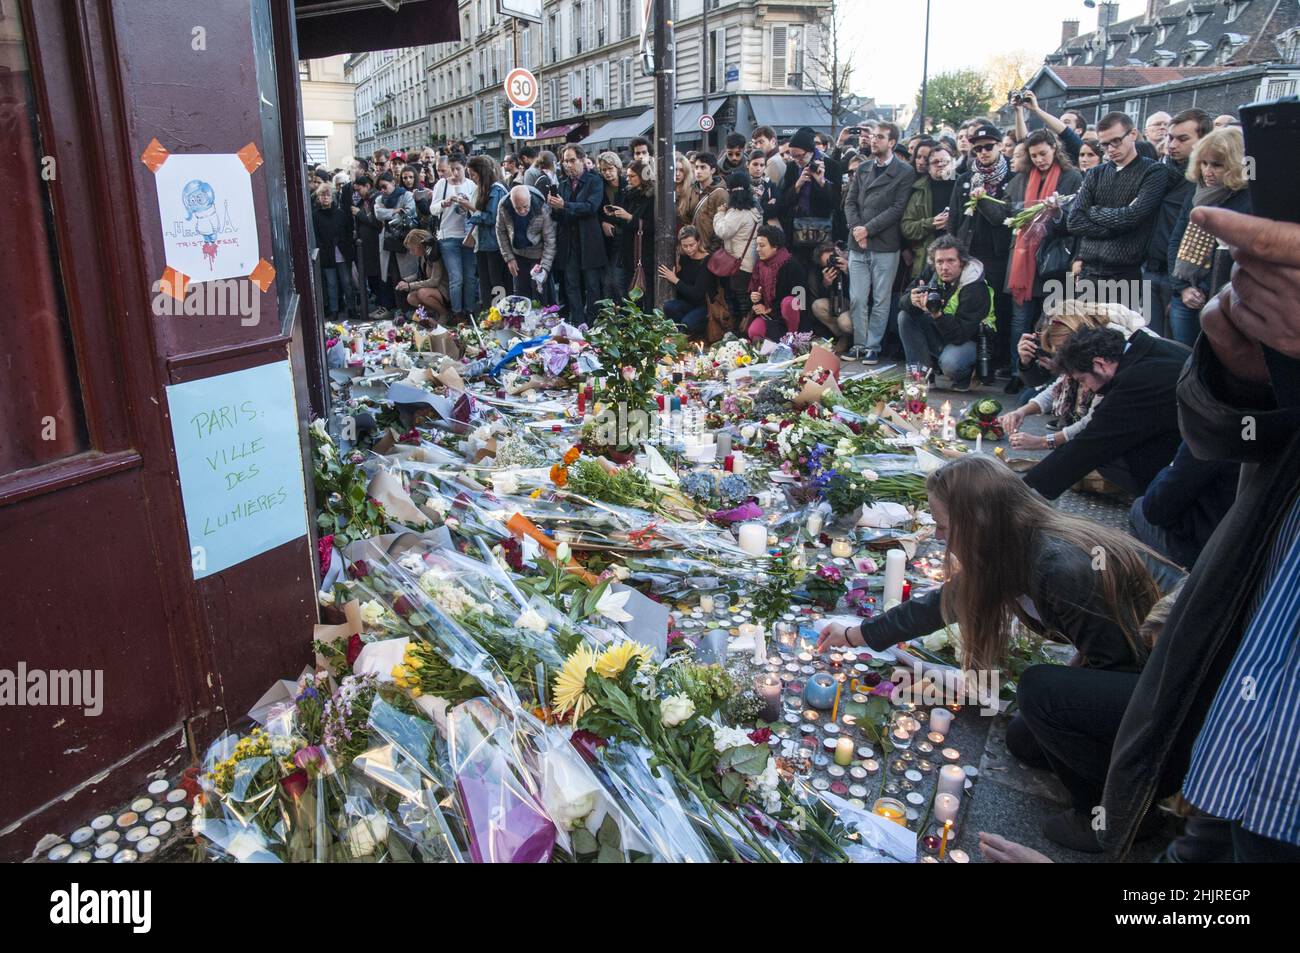 FRANCE. PARIS (75) 11/14/15 - AFTER THE TERRORIST ATTACKS OF NOVEMBER 13, 2015, PARISIANS HOMAGE TO THE VICTIMS OF LE CARILLON RESTAURANT, AT THE CORN Stock Photo